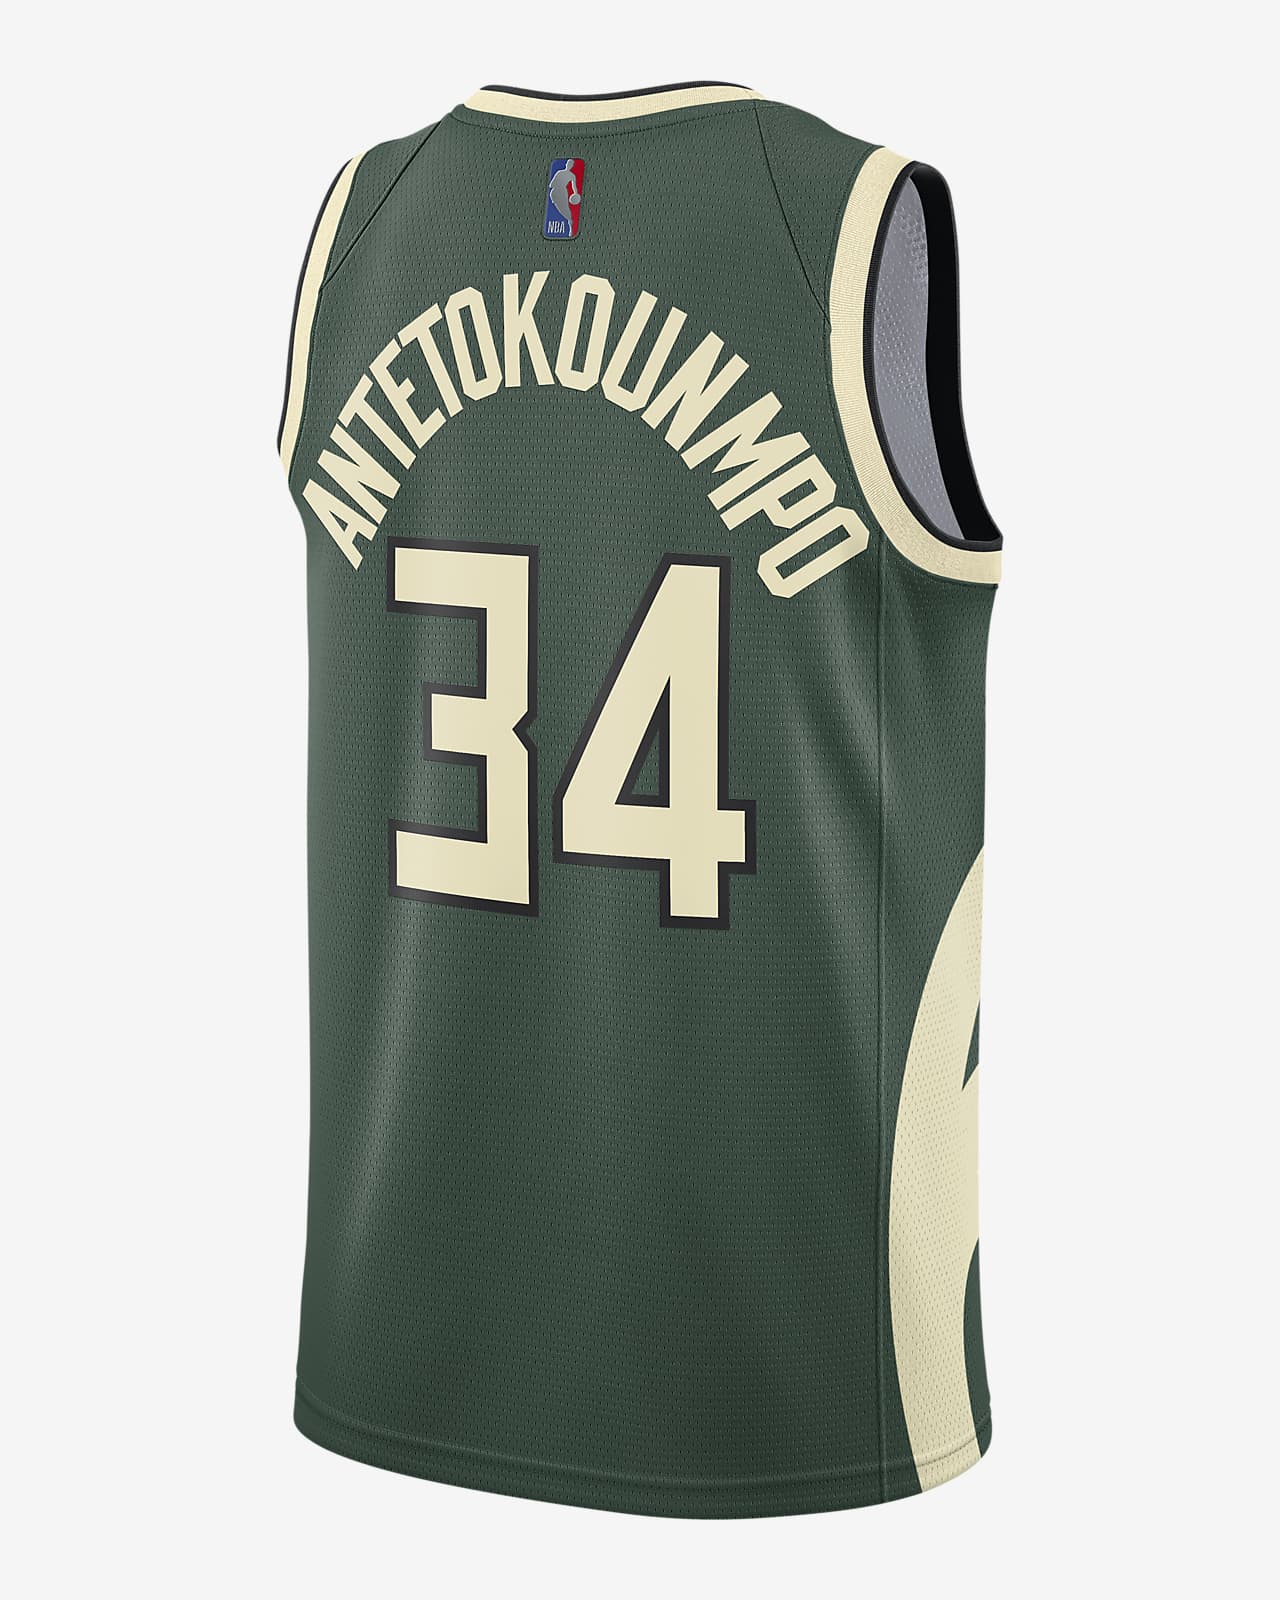 View Earned Milwaukee Bucks Jersey 2021 Pics – All in Here